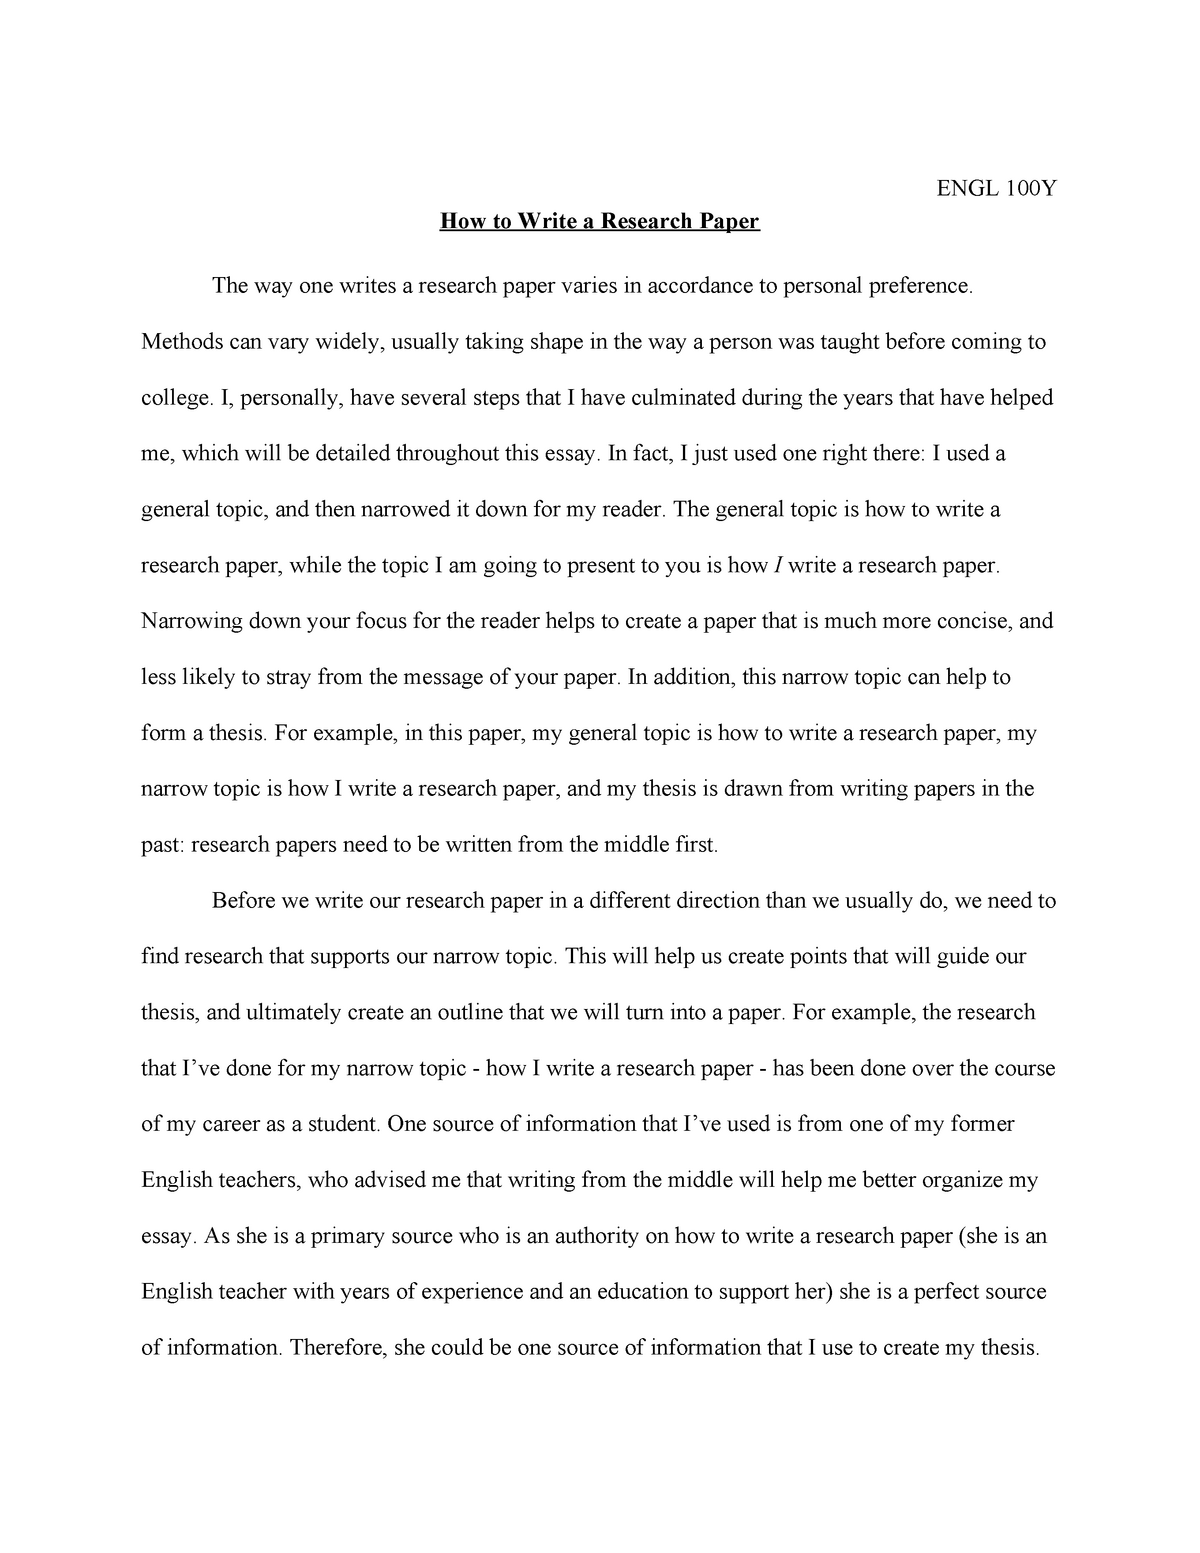 How to Write a Research Paper (Final Draft) - ENGL 20Y